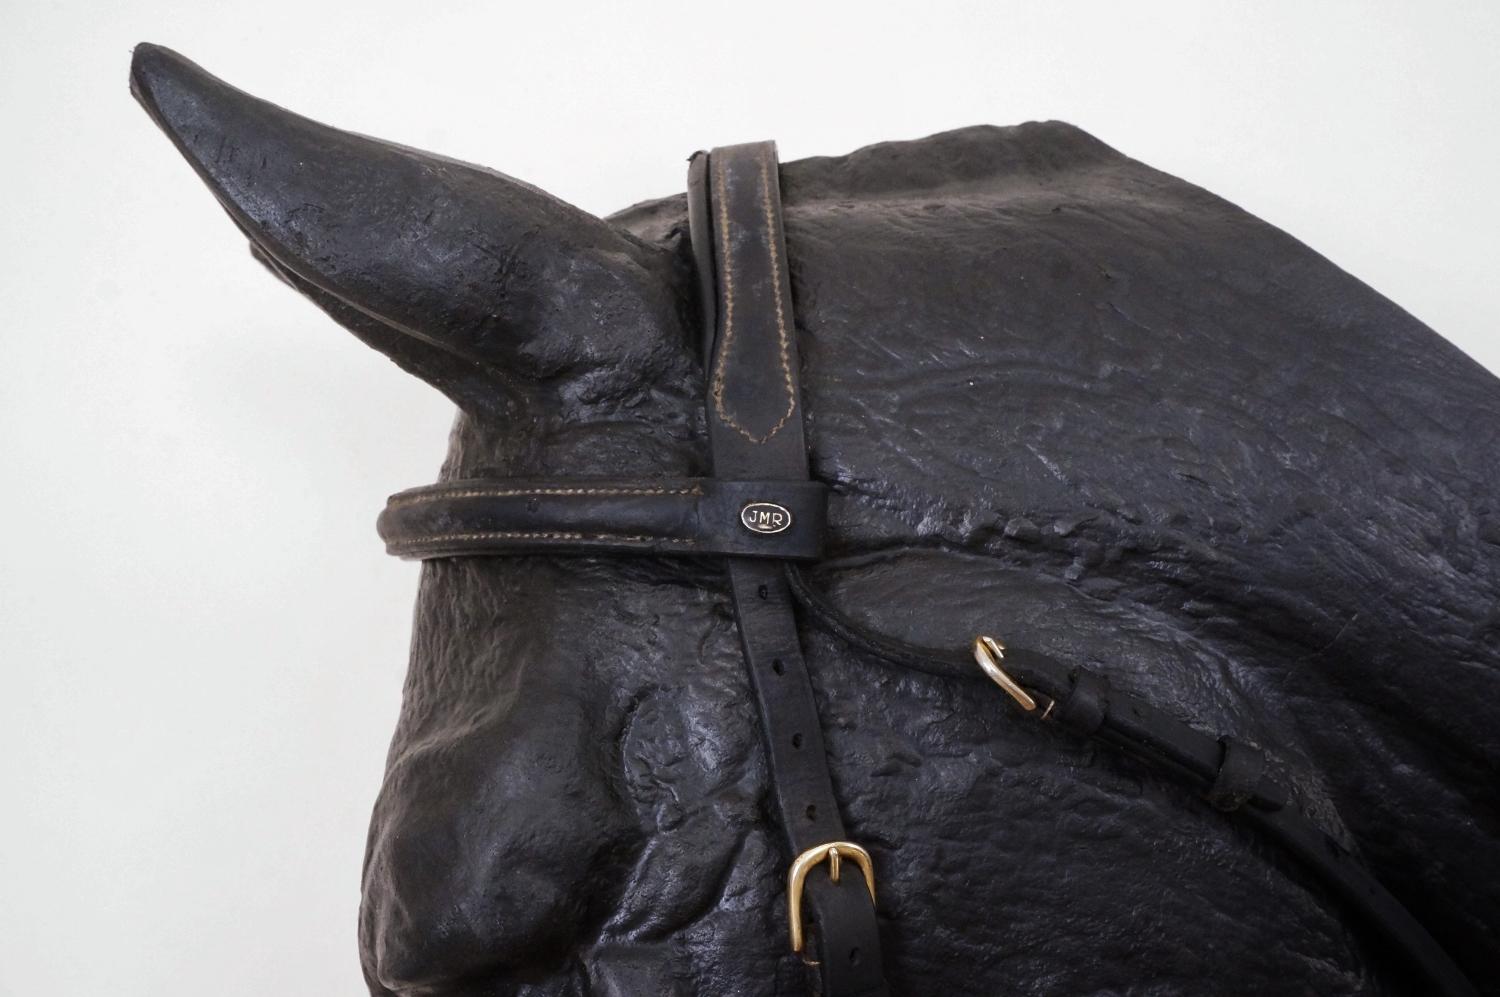 Sculpture Horse Head Life-Sized Shop Display for Leather Bridle, 1970s, English In Good Condition For Sale In London, GB